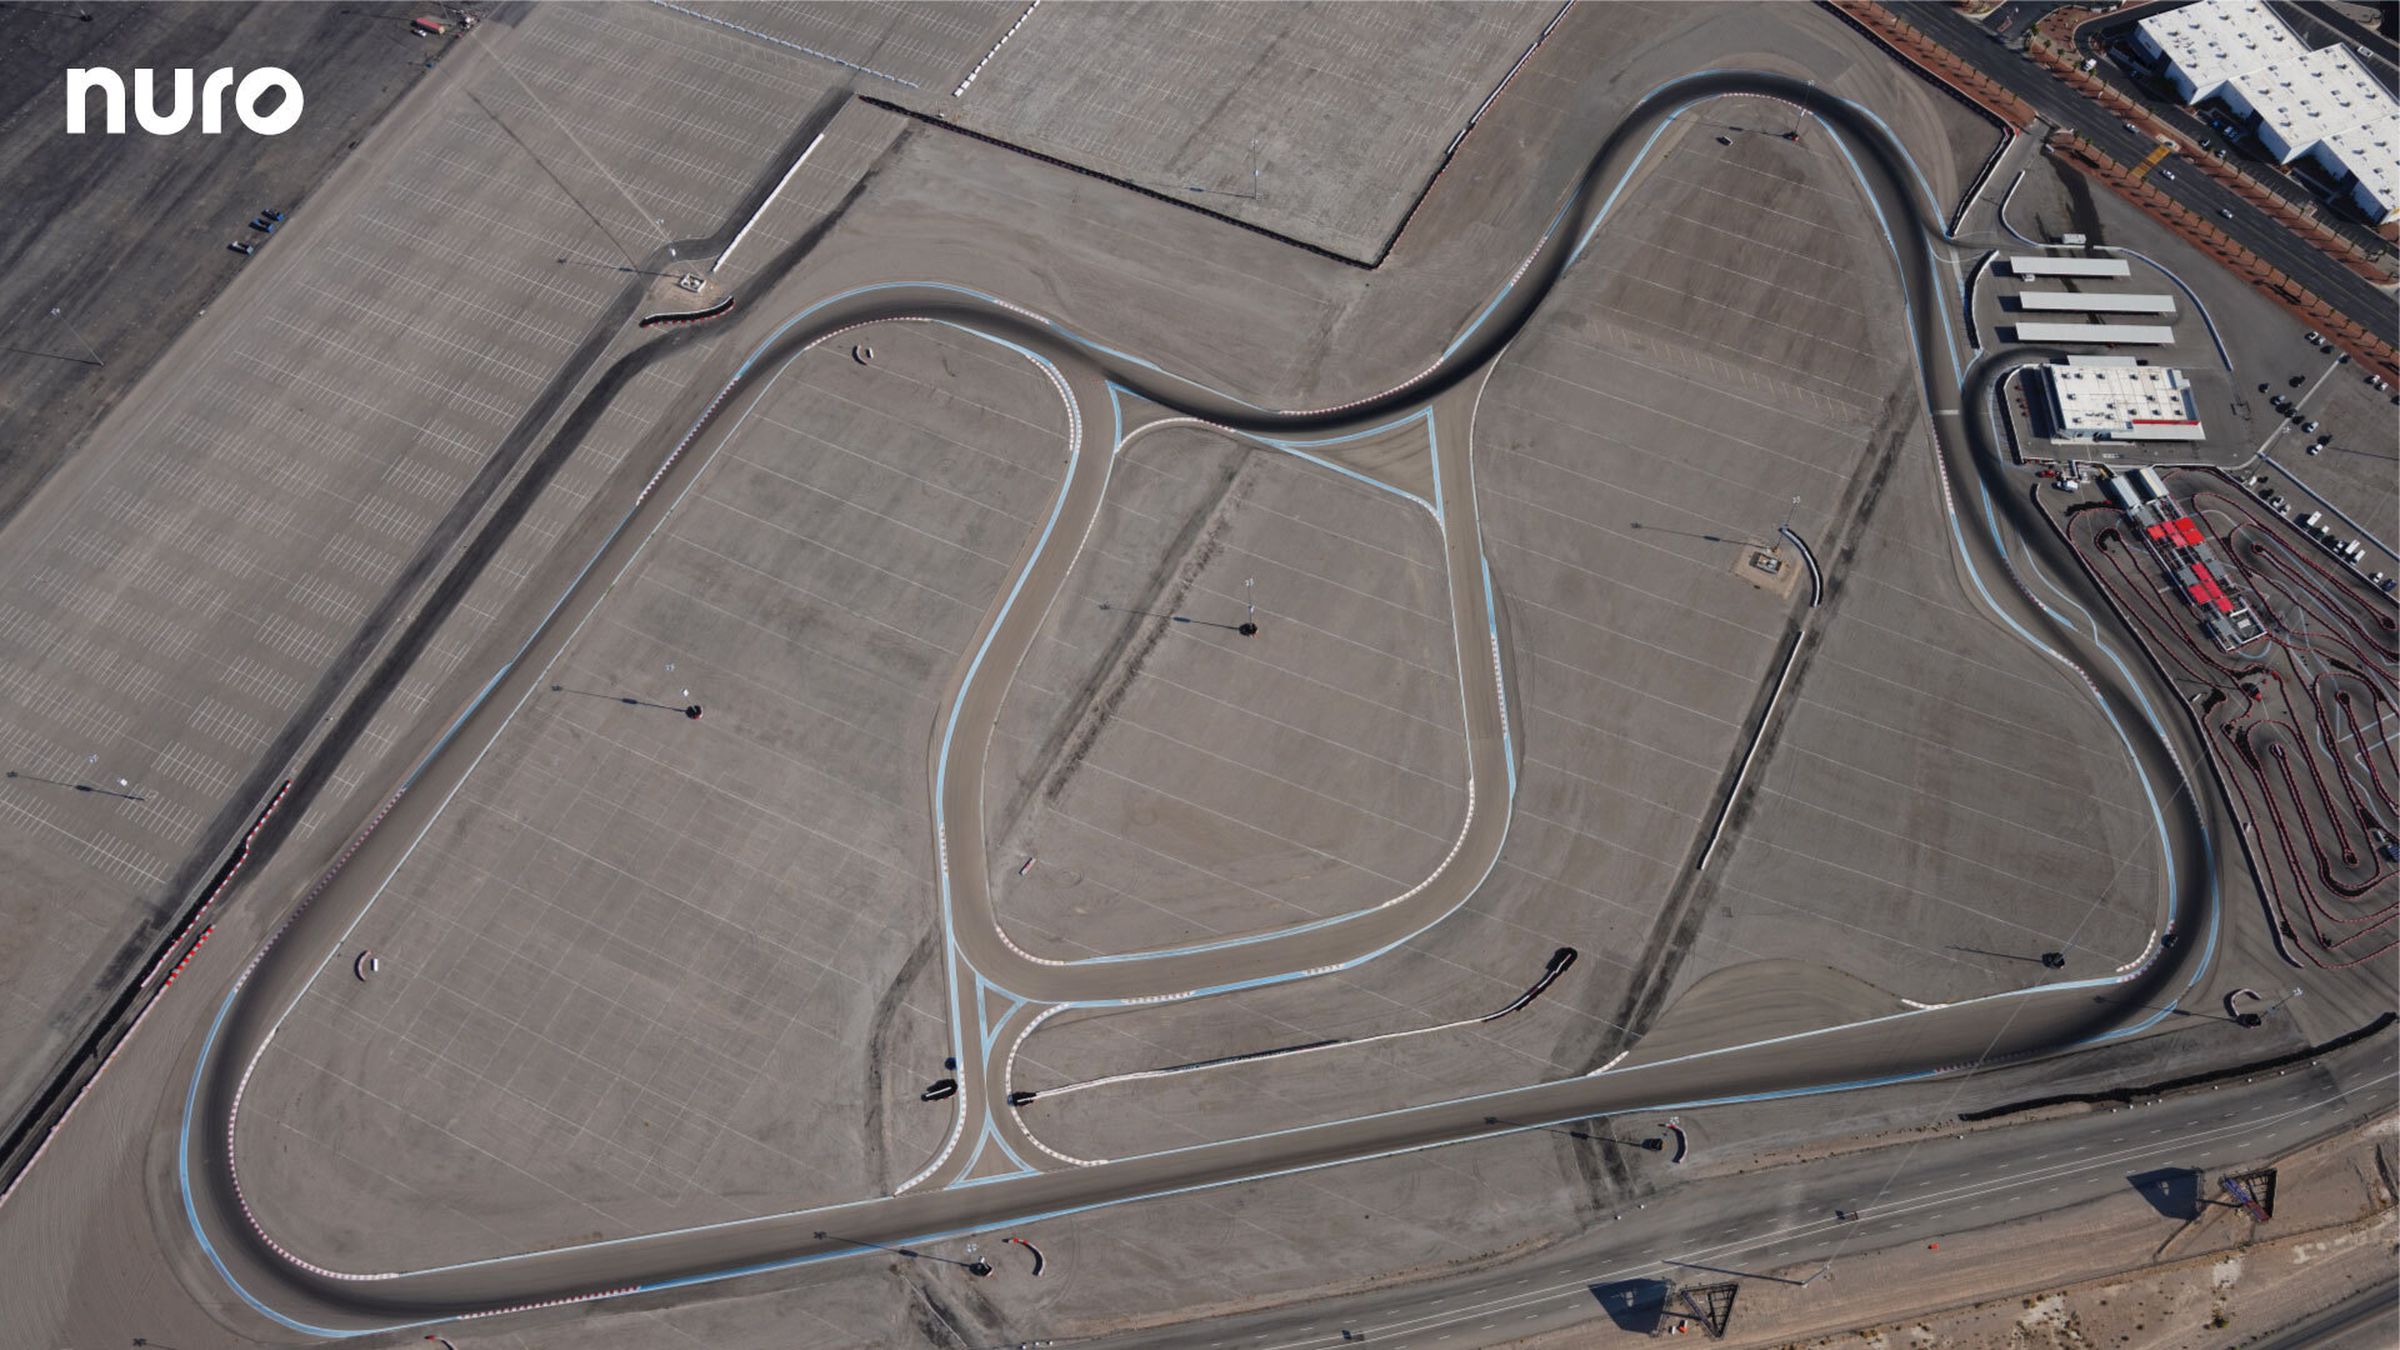 Nuro is taking over 74 acres of the Las Vegas Motor Speedway for its test track.